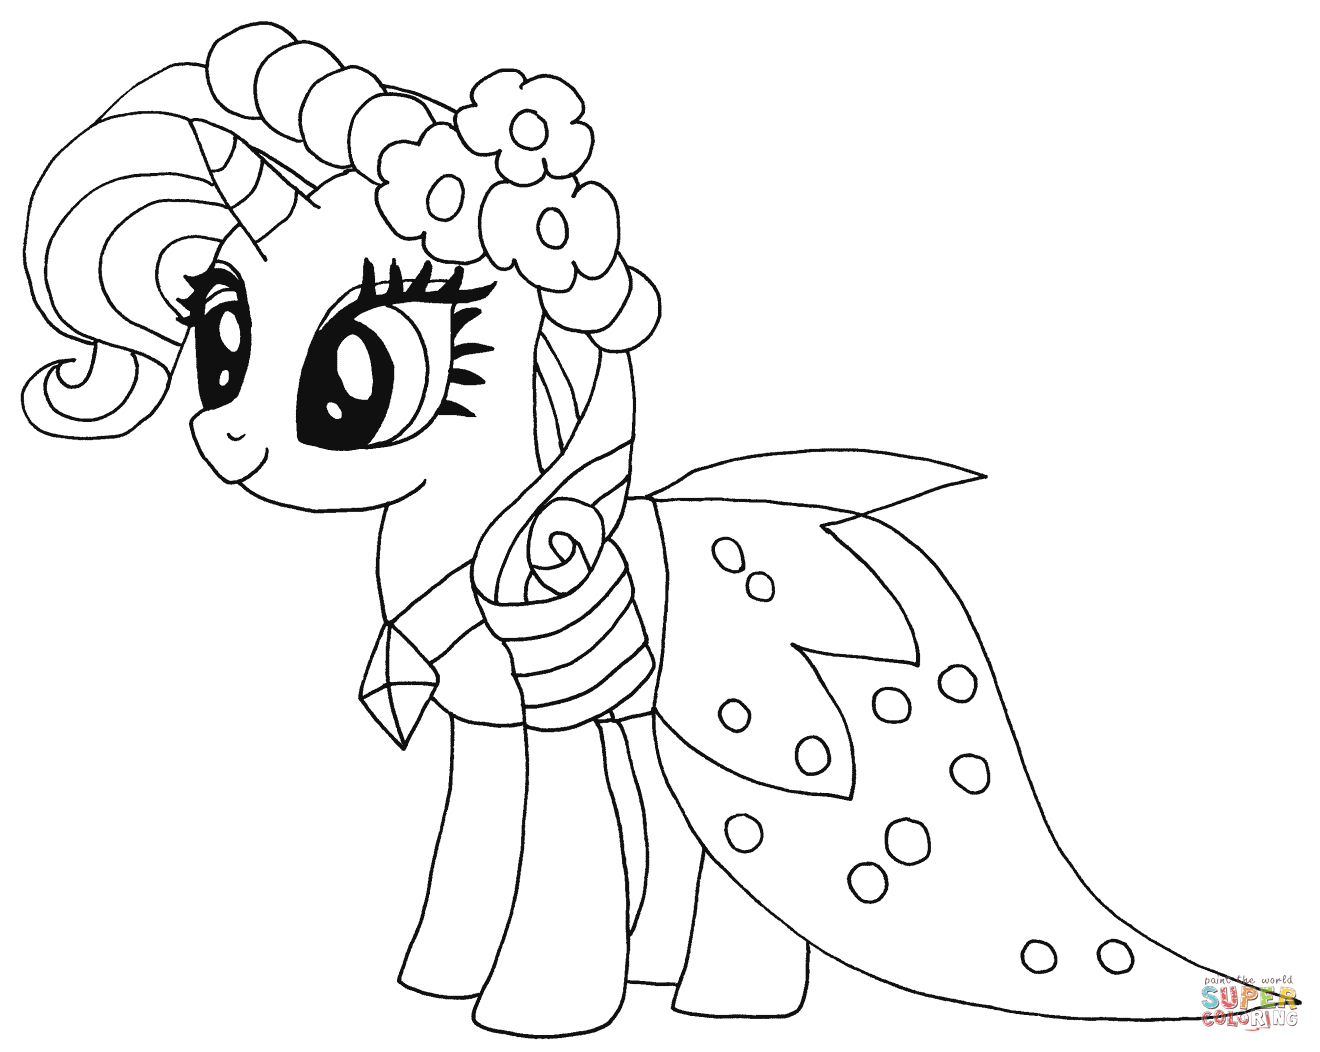 Mlp Coloring Pages Rarity My Little Pony Coloring Pages Free Coloring Pages